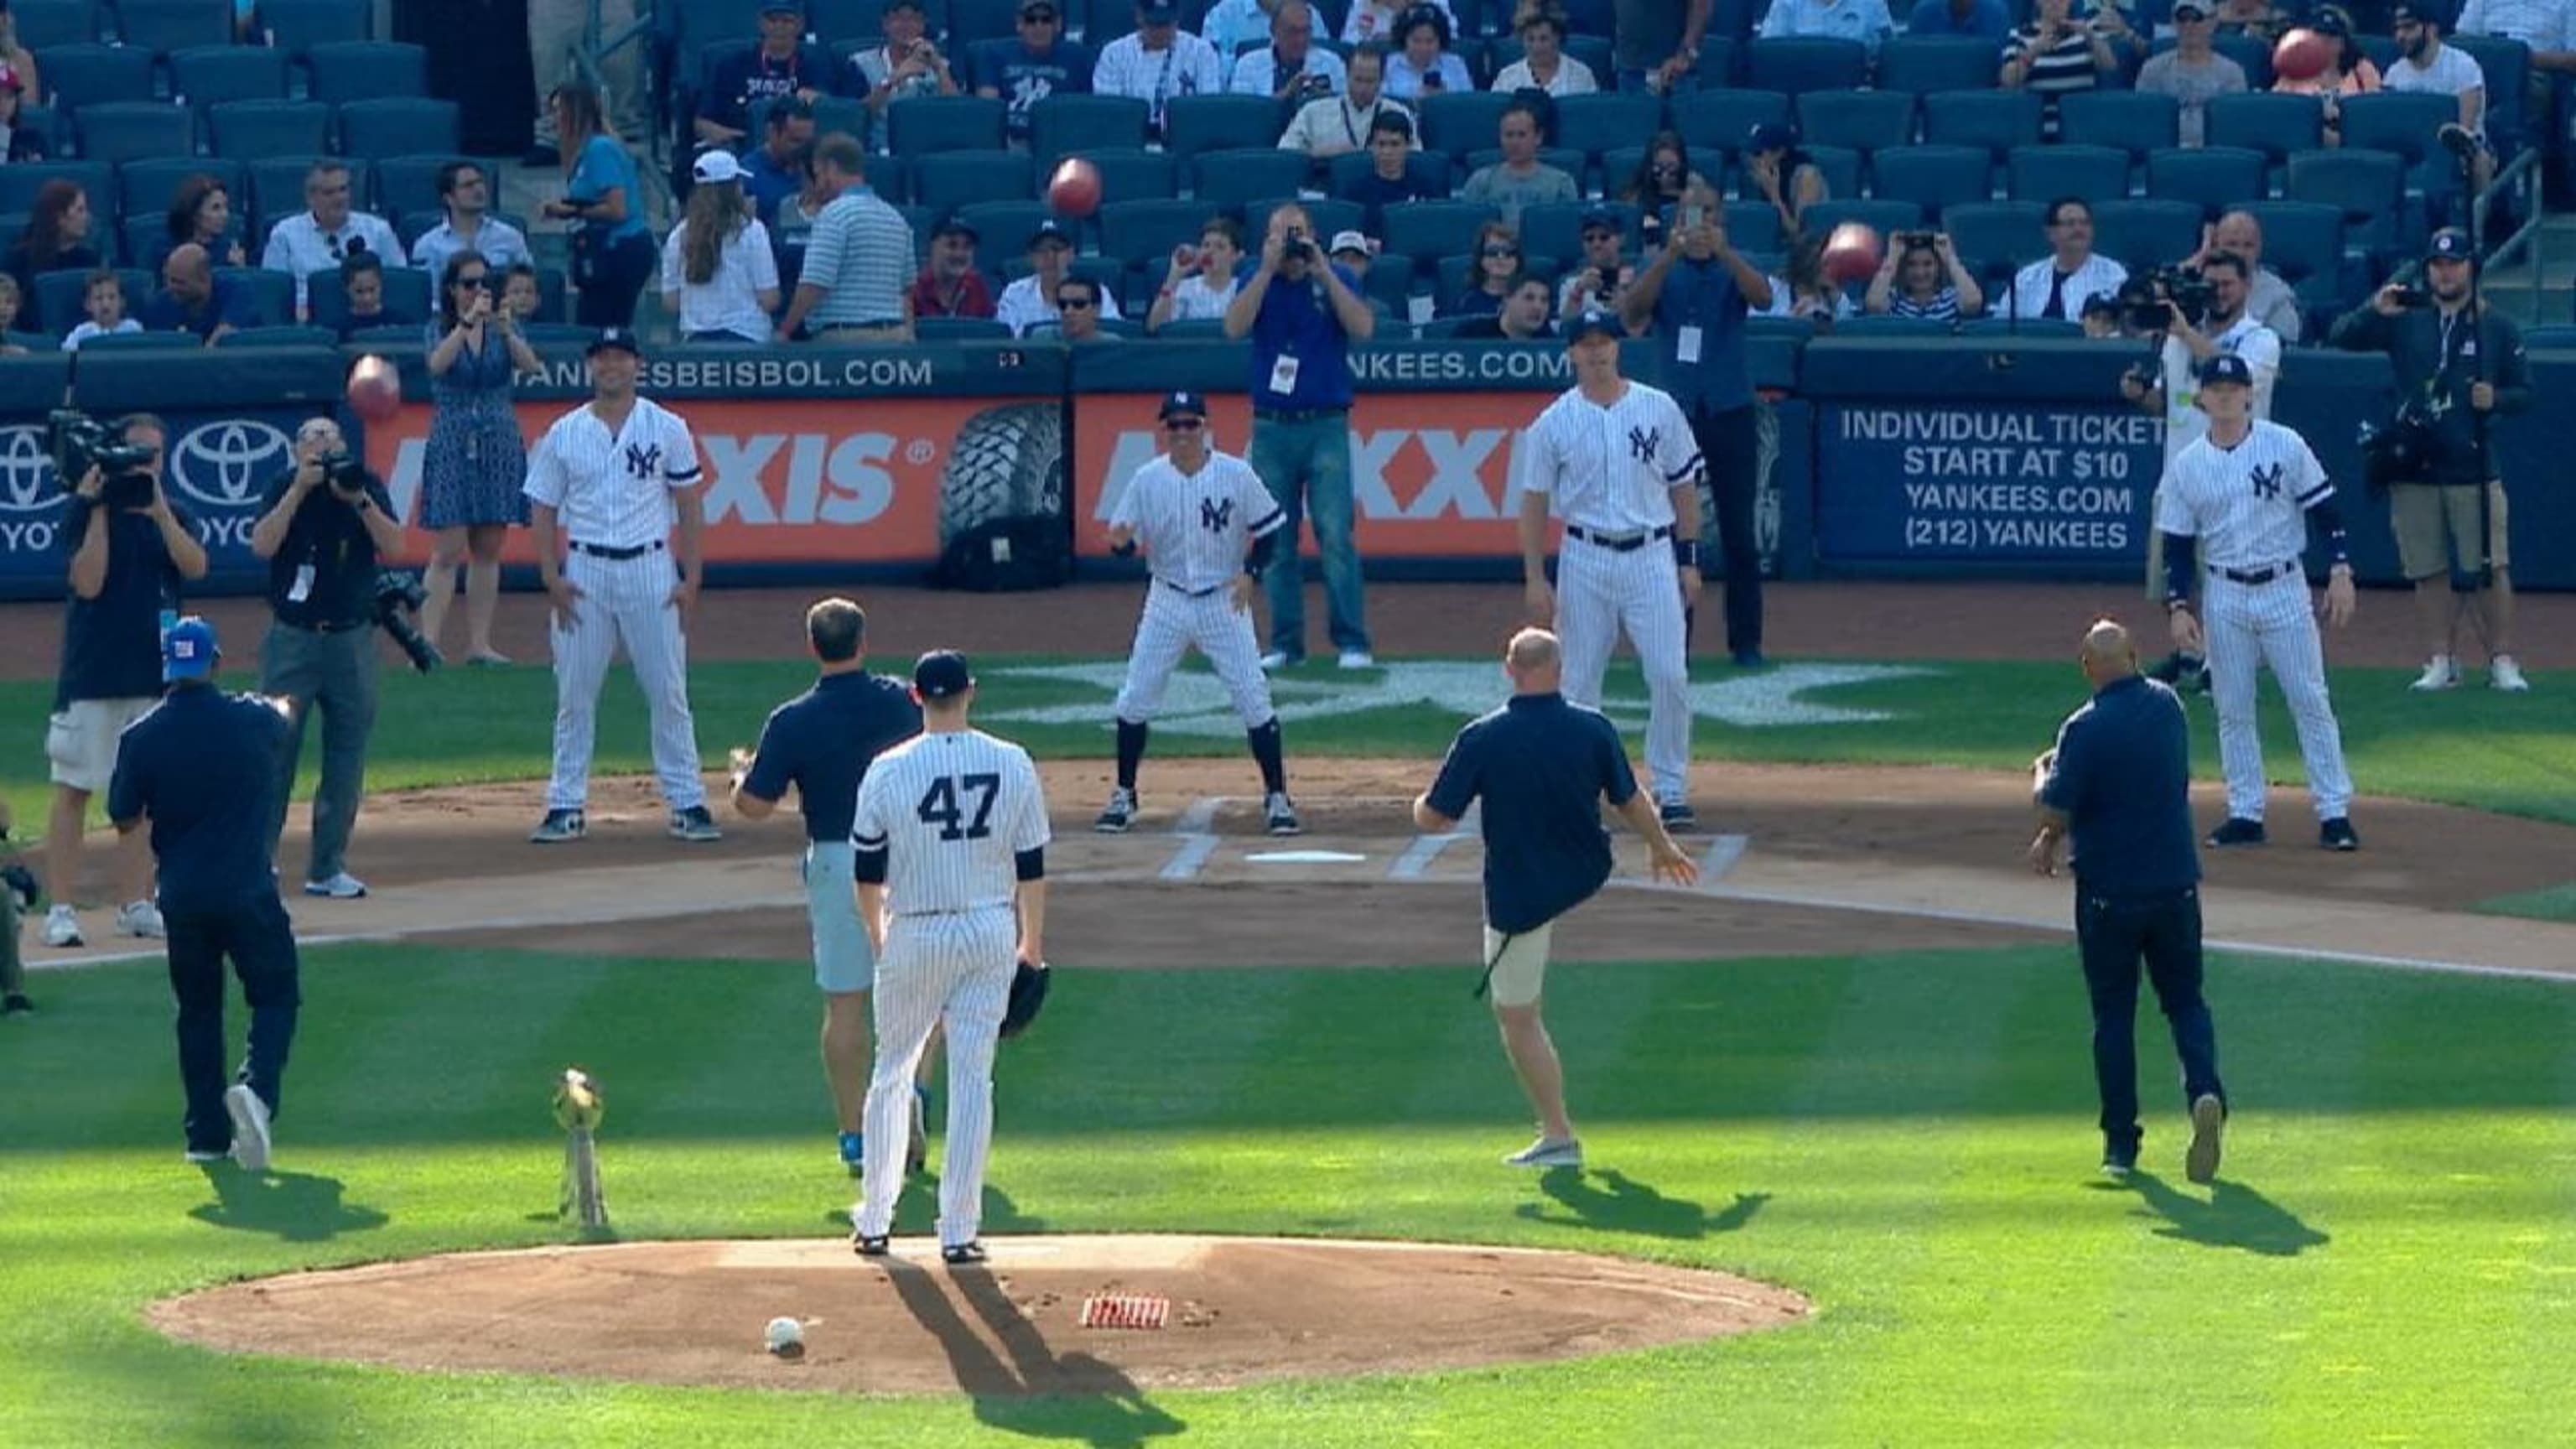 Members of the 2007 New York Giants threw (and kicked) ceremonial first  passes at Yankee Stadium